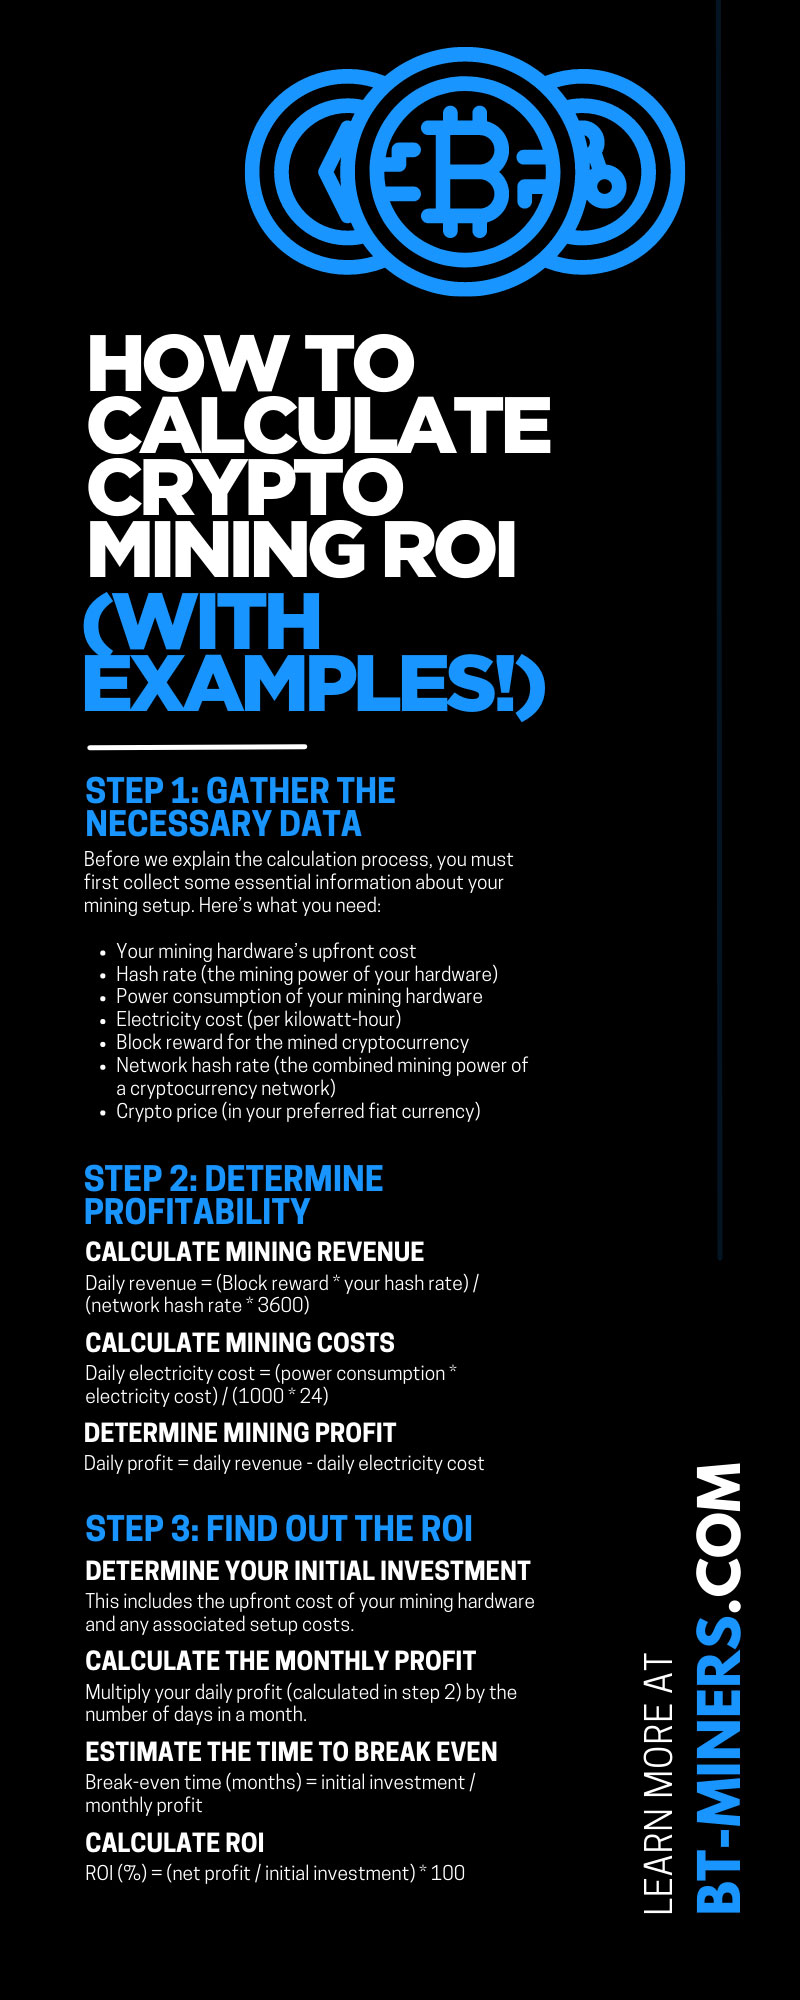 How To Calculate Crypto Mining ROI With Examples